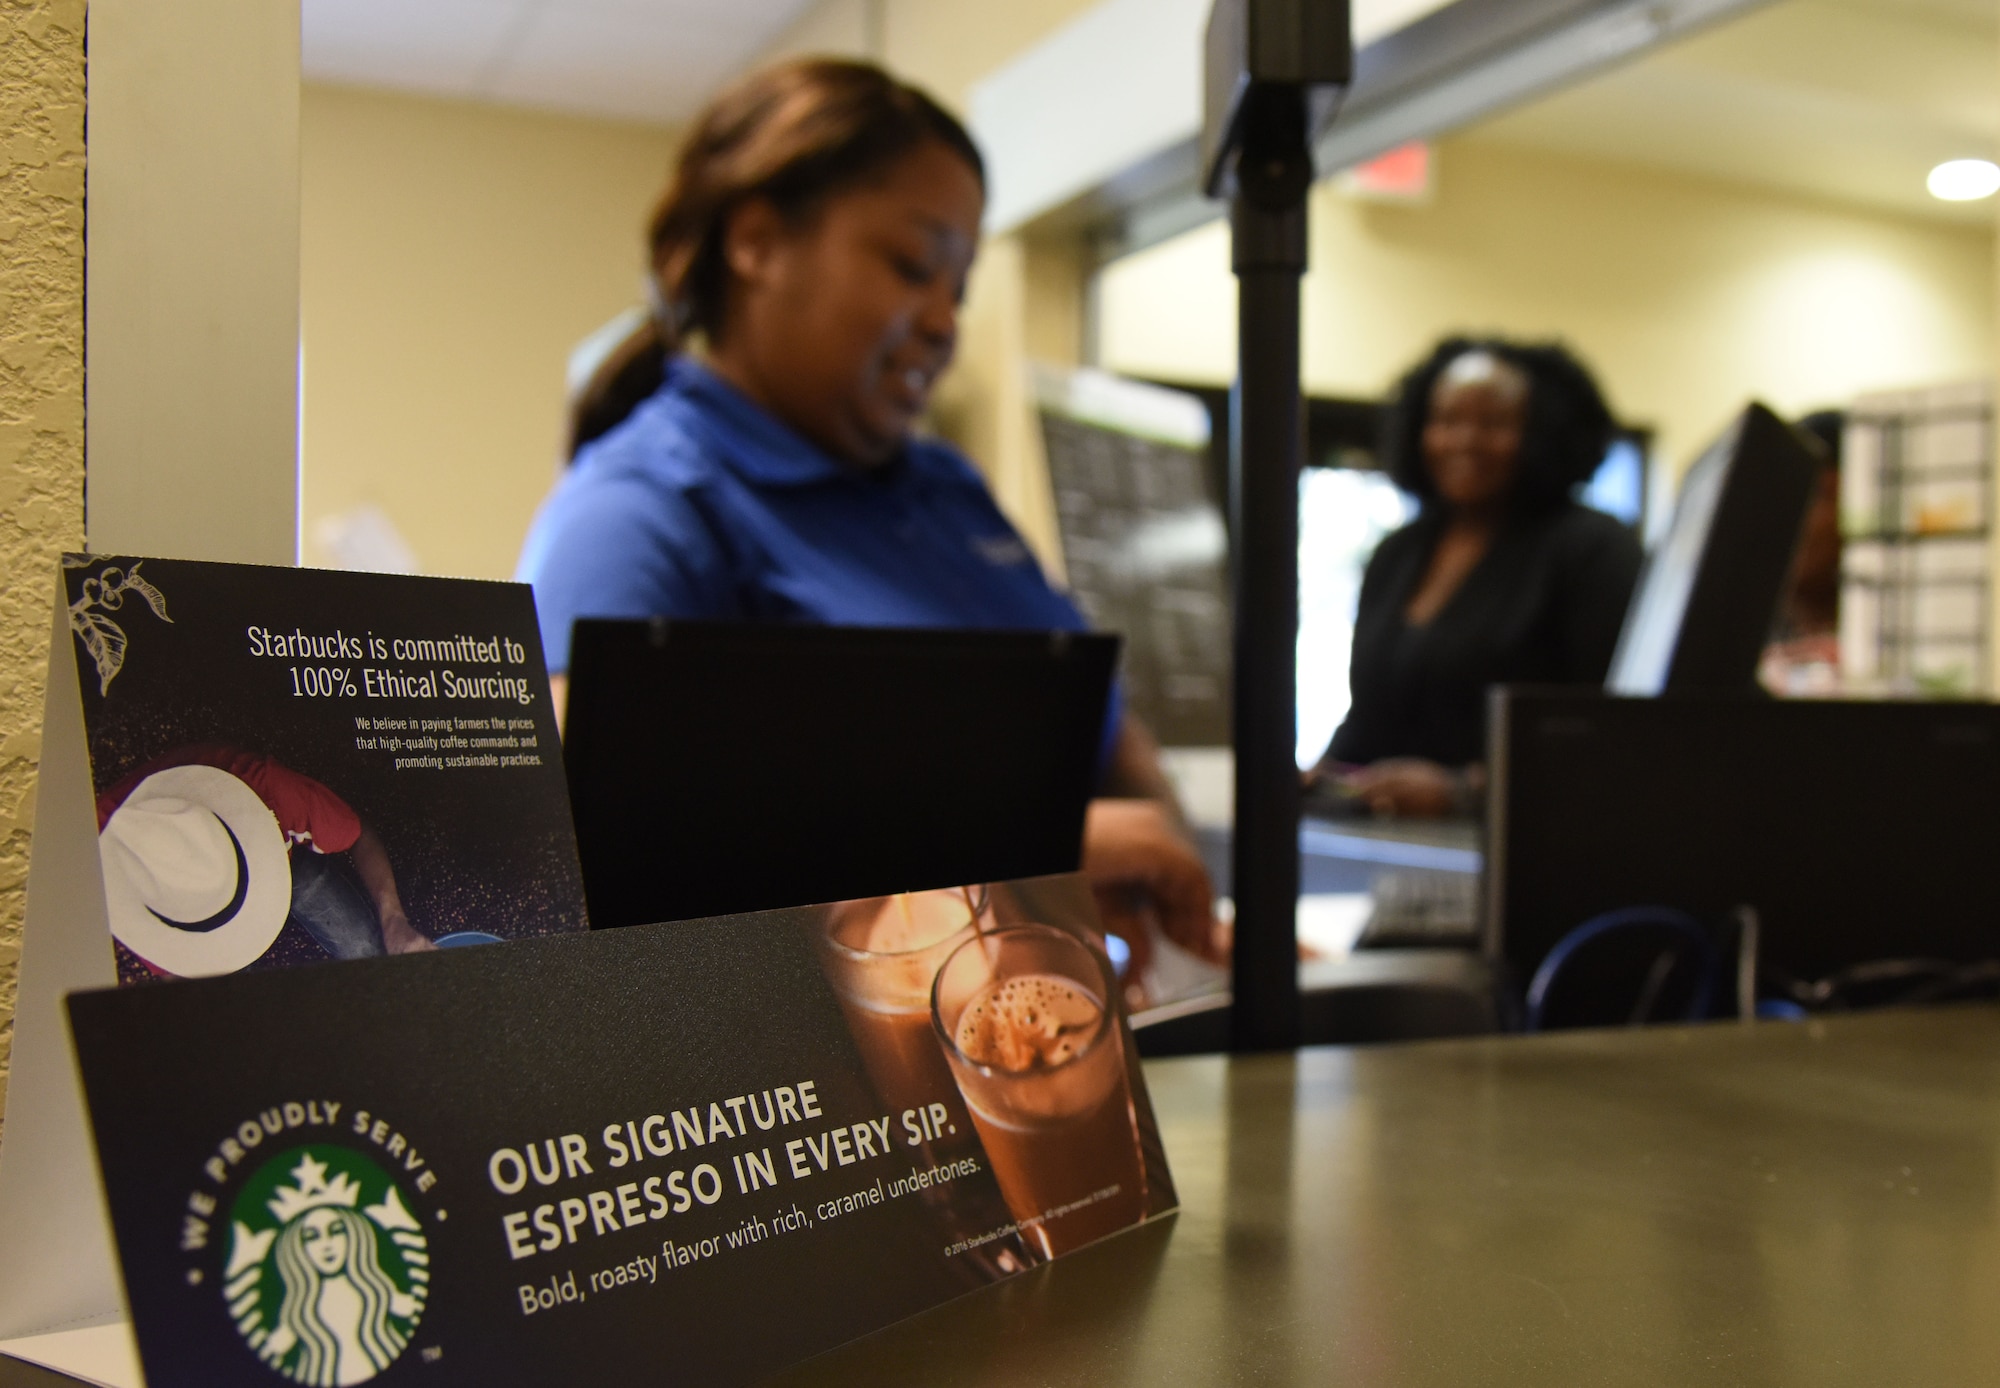 Teaunda Rodgers, 81st Force Support Squadron sales clerk, rings up a customer at “It Is In The Cup” in the Bay Breeze Event Center June 8, 2017, on Keesler Air Force Base, Miss. Keesler's new coffee & smoothie bar will have its grand opening on June 29 at the Bay Breeze Event Center. The facility proudly serves Starbucks coffee, Frappuccino’s, iced beverages and espresso as well as Island Oasis smoothies in a variety of flavors. A full menu of items can be found at keesler81fss.us. (U.S. Air Force photo by Kemberly Groue)